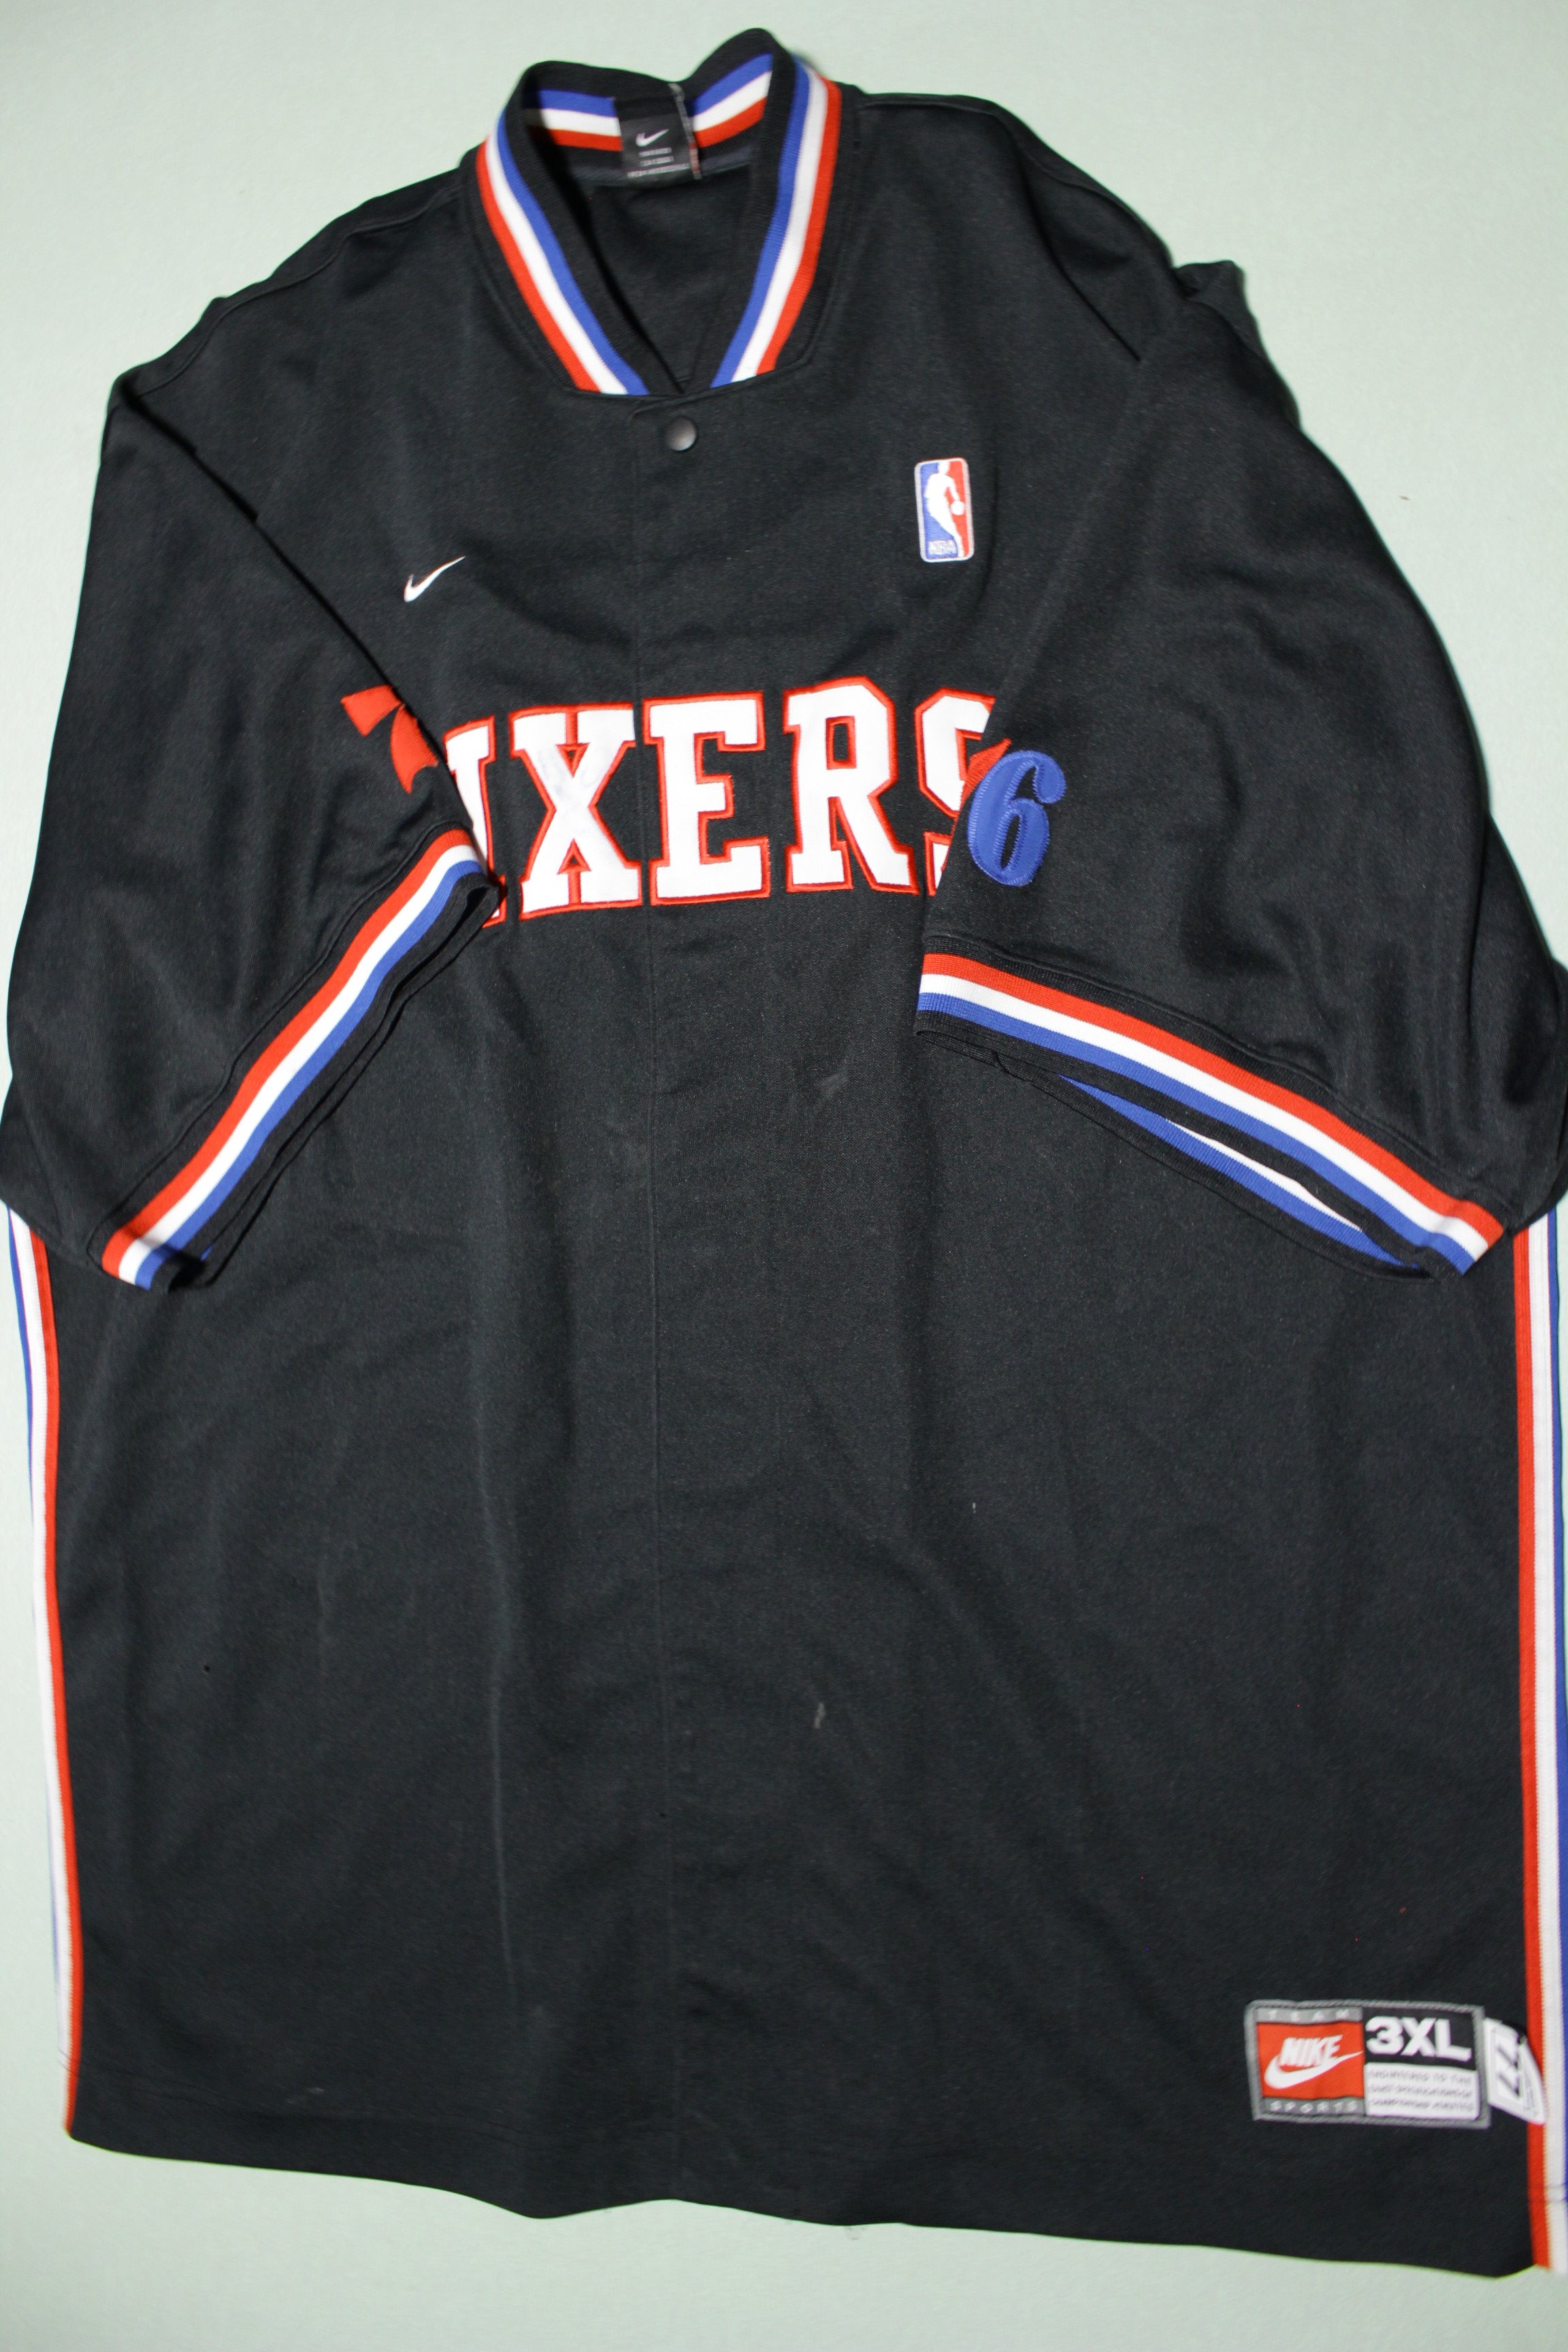 Vintage Rare to find 76ers retro nba warm up jersey shirt, Men's